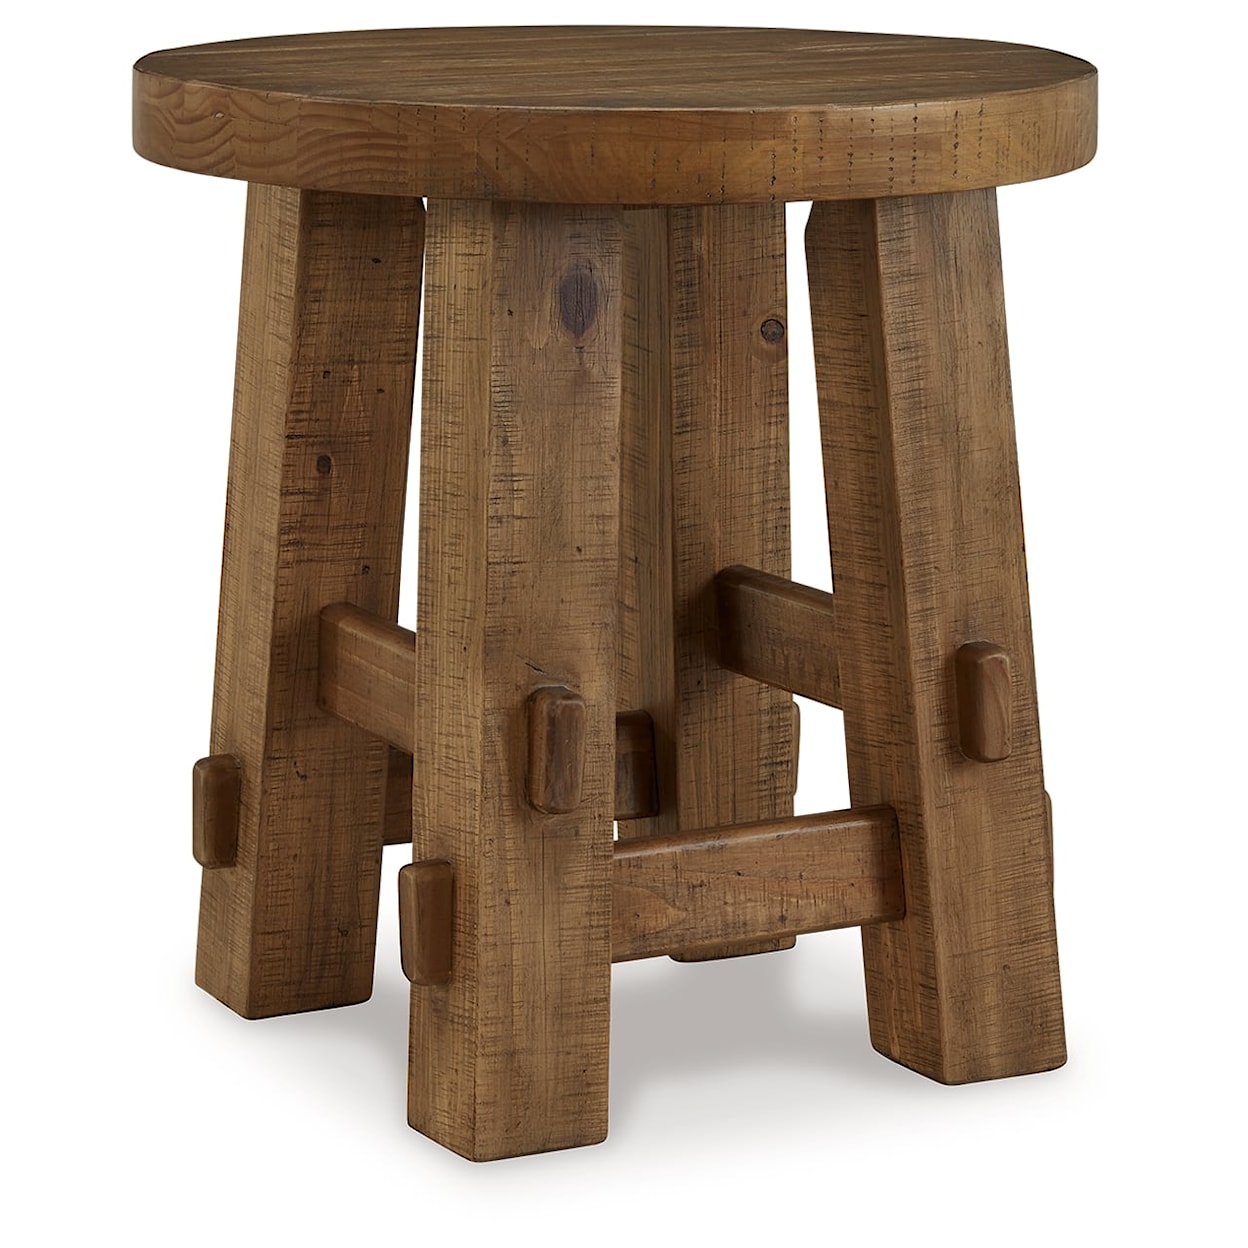 Signature Design by Ashley Mackifeld Round End Table